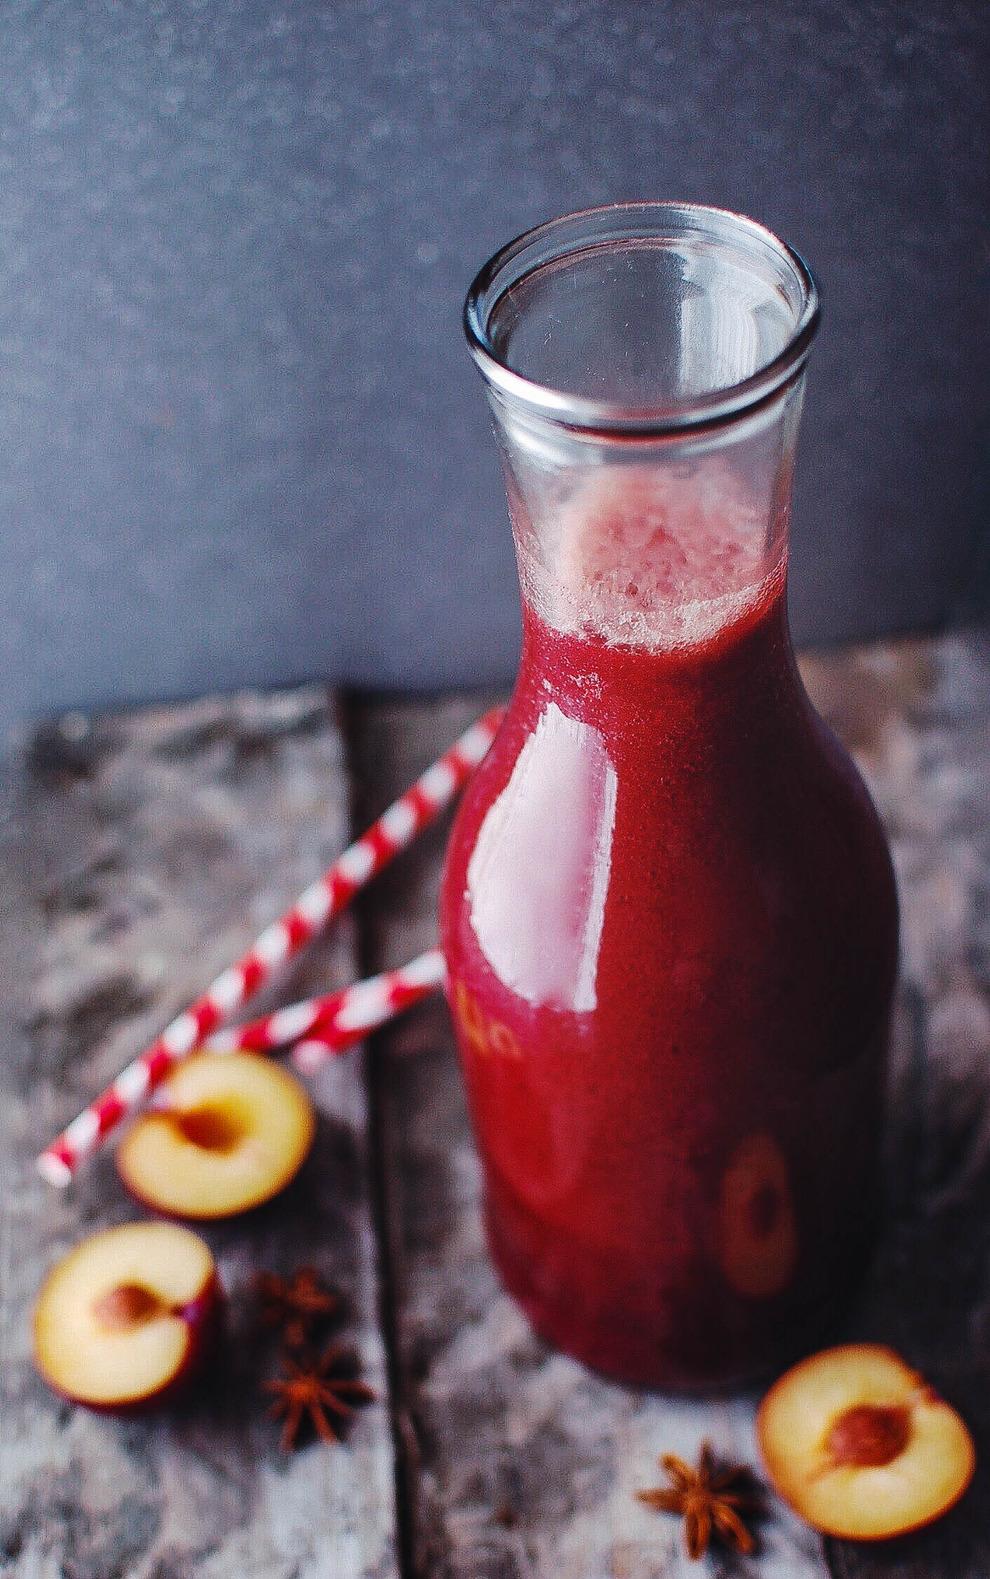 plums roots & stars smoothie 1-2 servings 1 medium raw beetroot 3 plums 1 banana 1/2